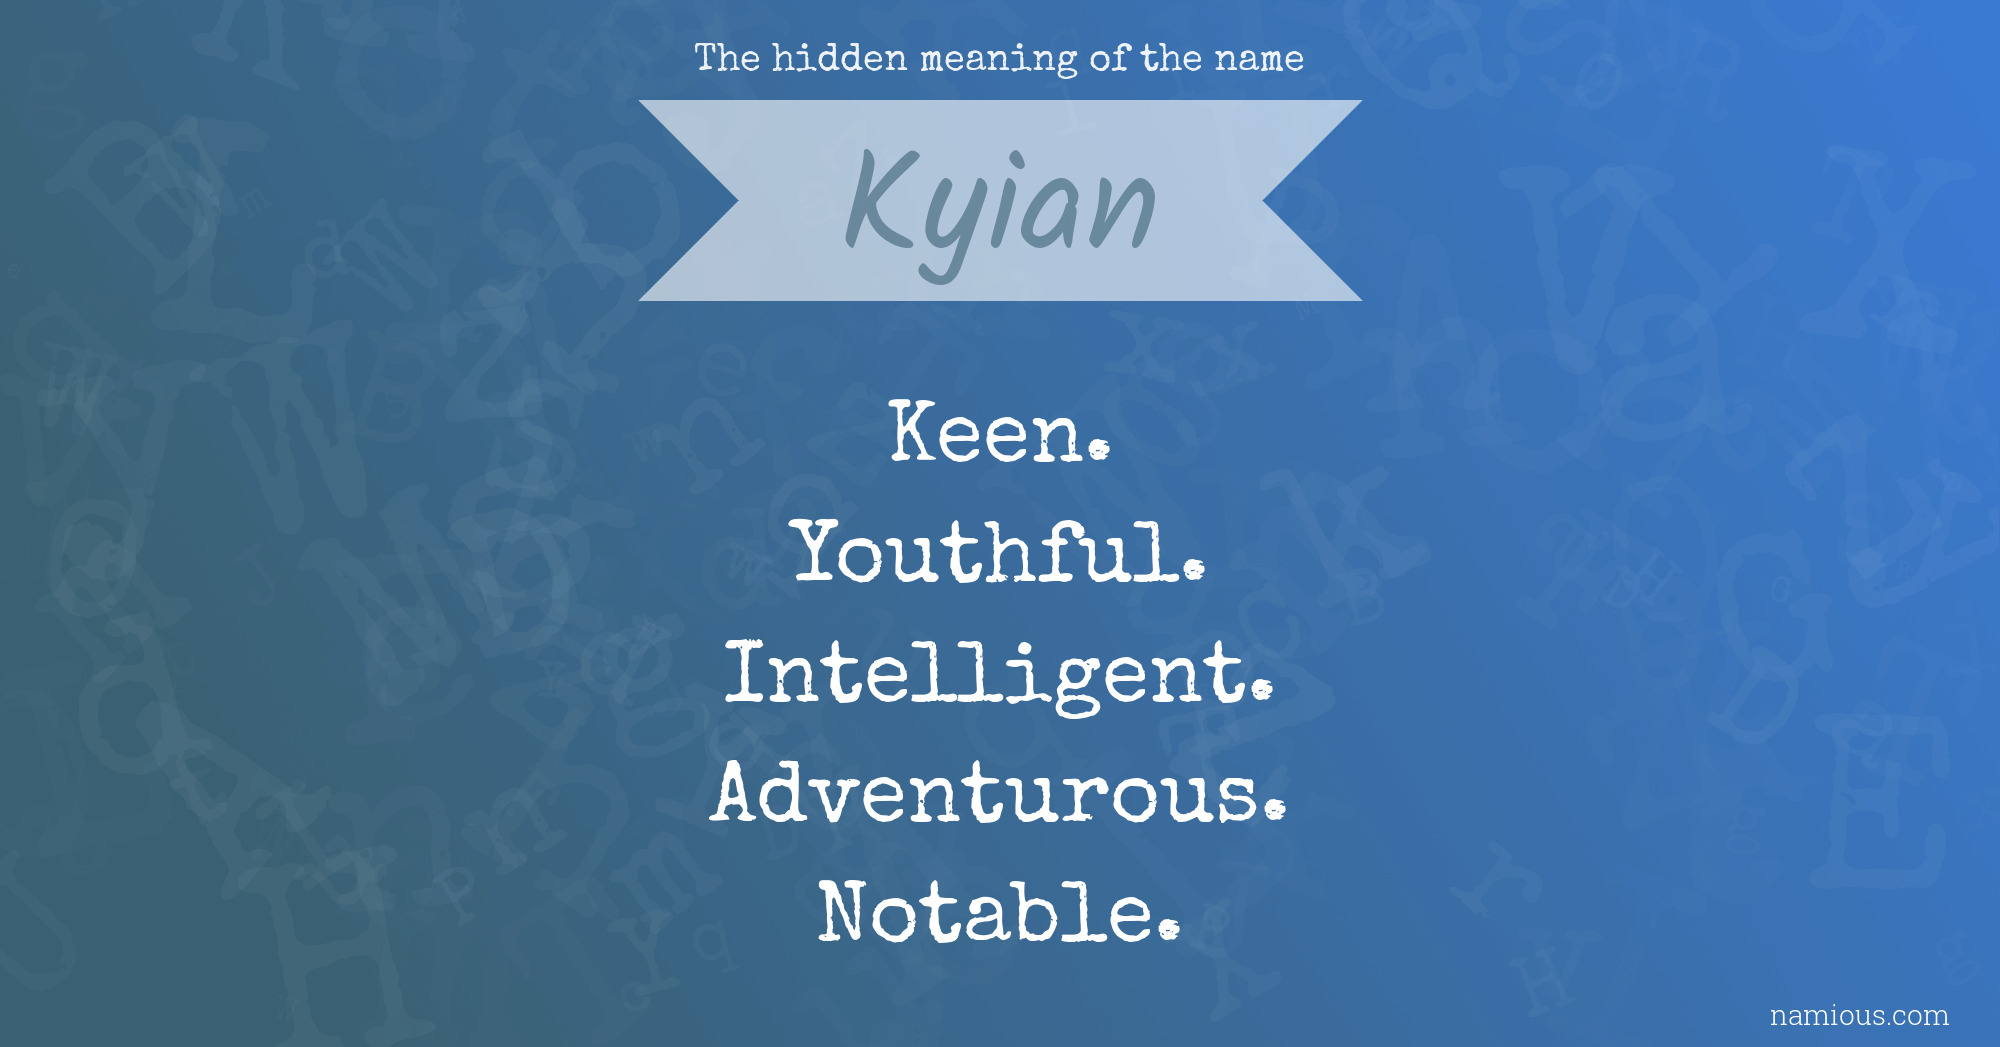 The hidden meaning of the name Kyian